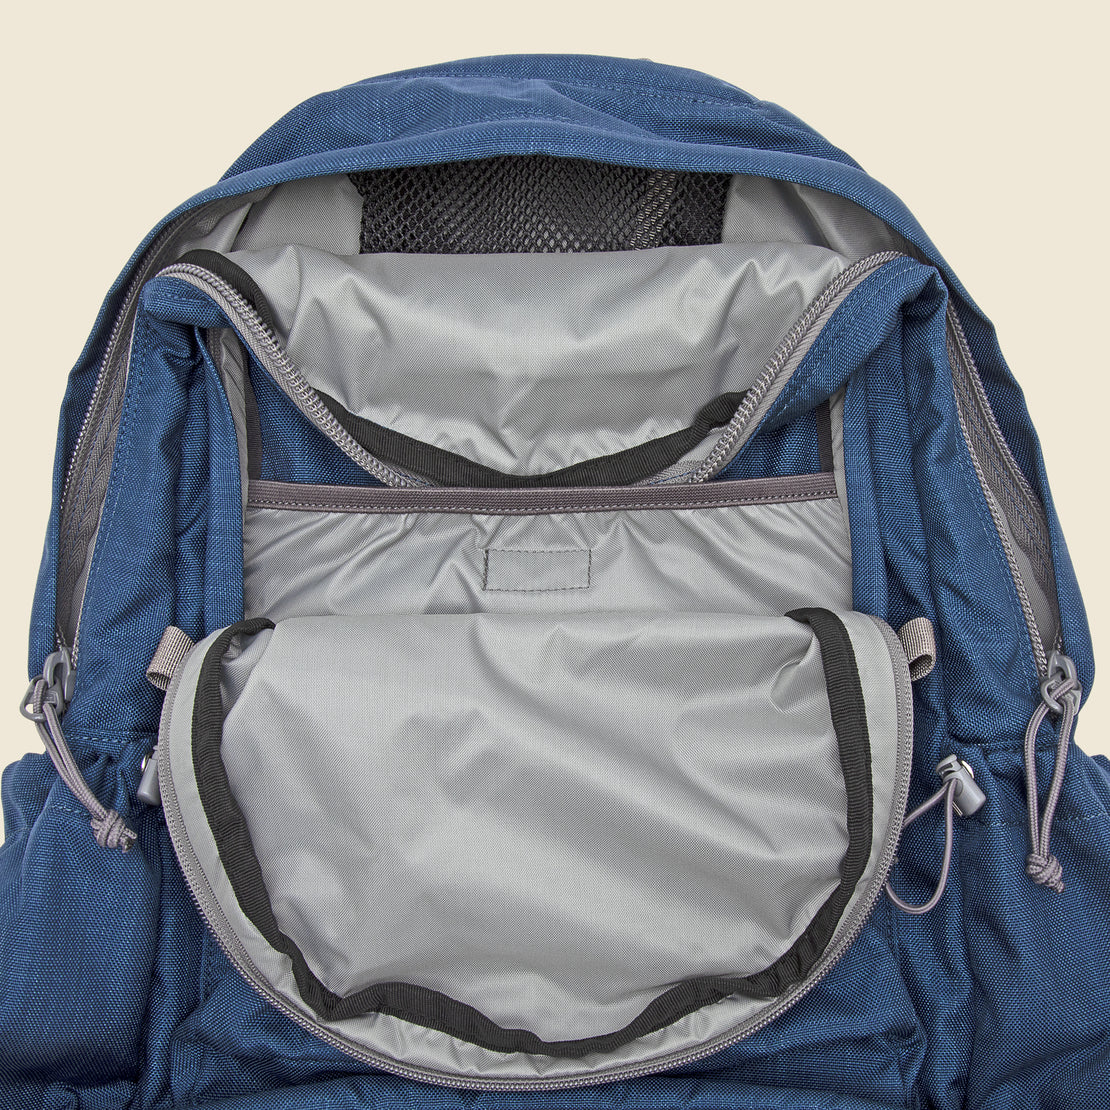 2 Compartment Day Pack - Blue - BEAMS+ - STAG Provisions - Accessories - Bags / Luggage